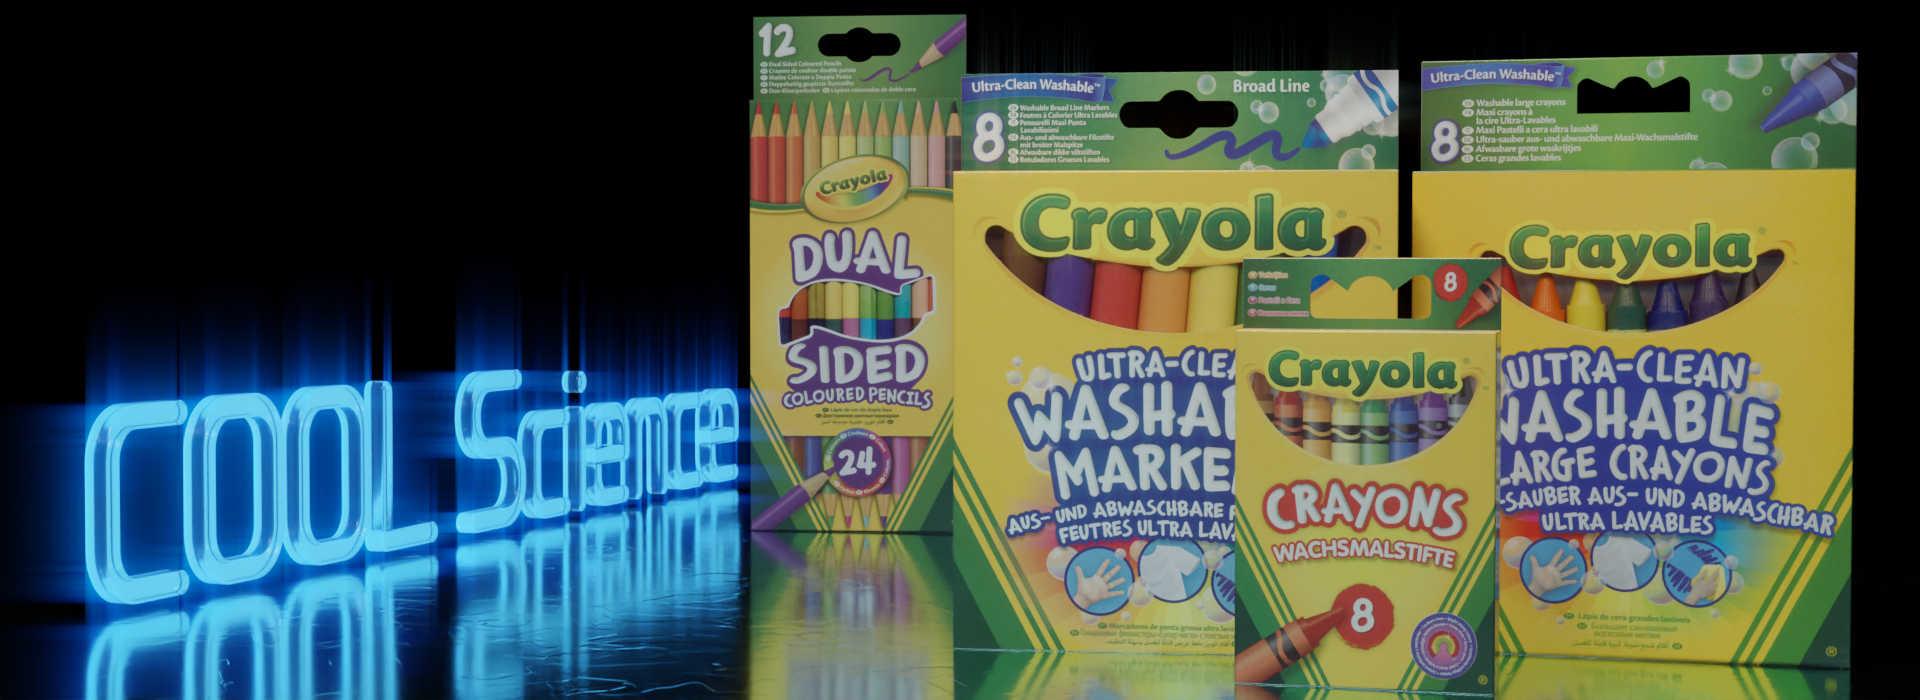 A selection of Crayola branded products available from COOL Science